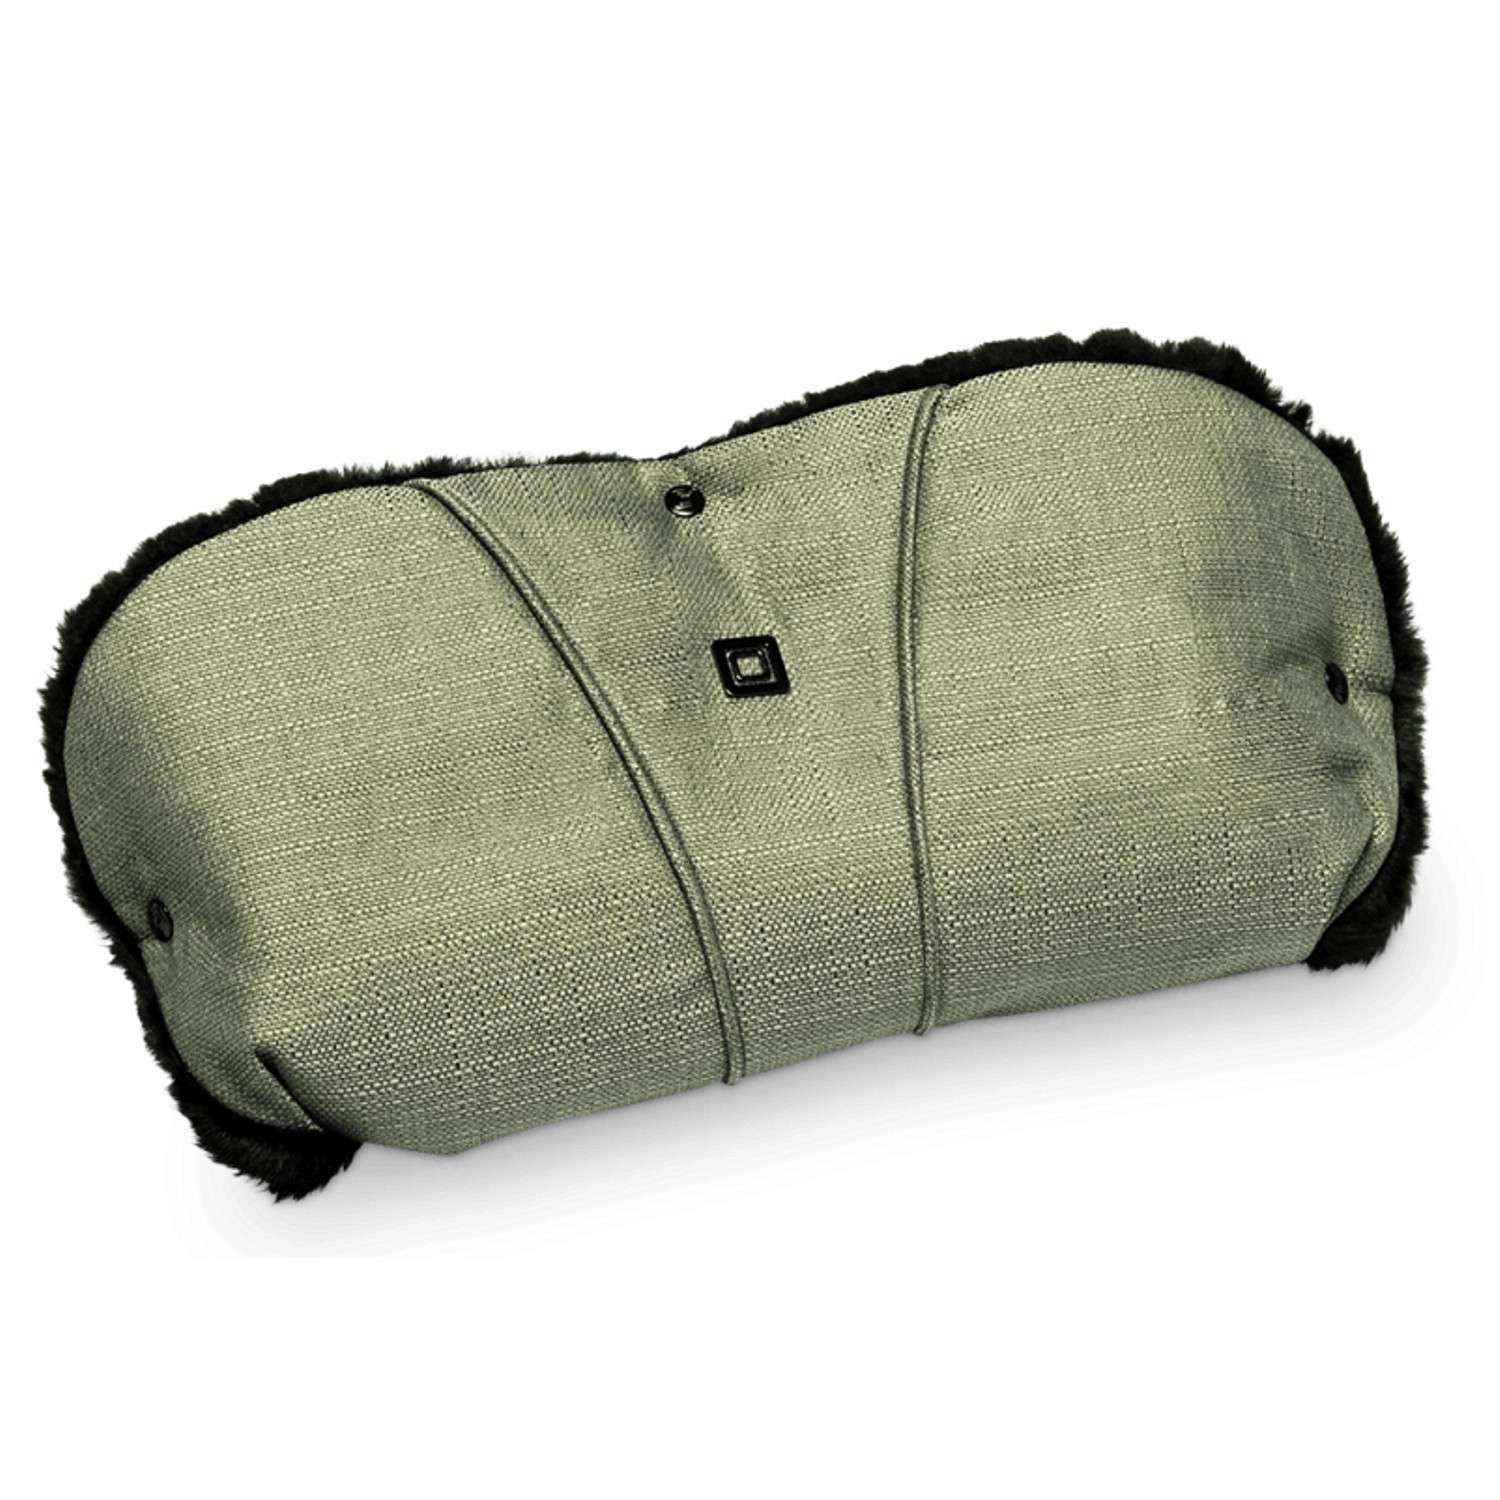 Муфта для рук Moon Hand Muff Olive Structure (004) 2019 680044-004 - фото 1